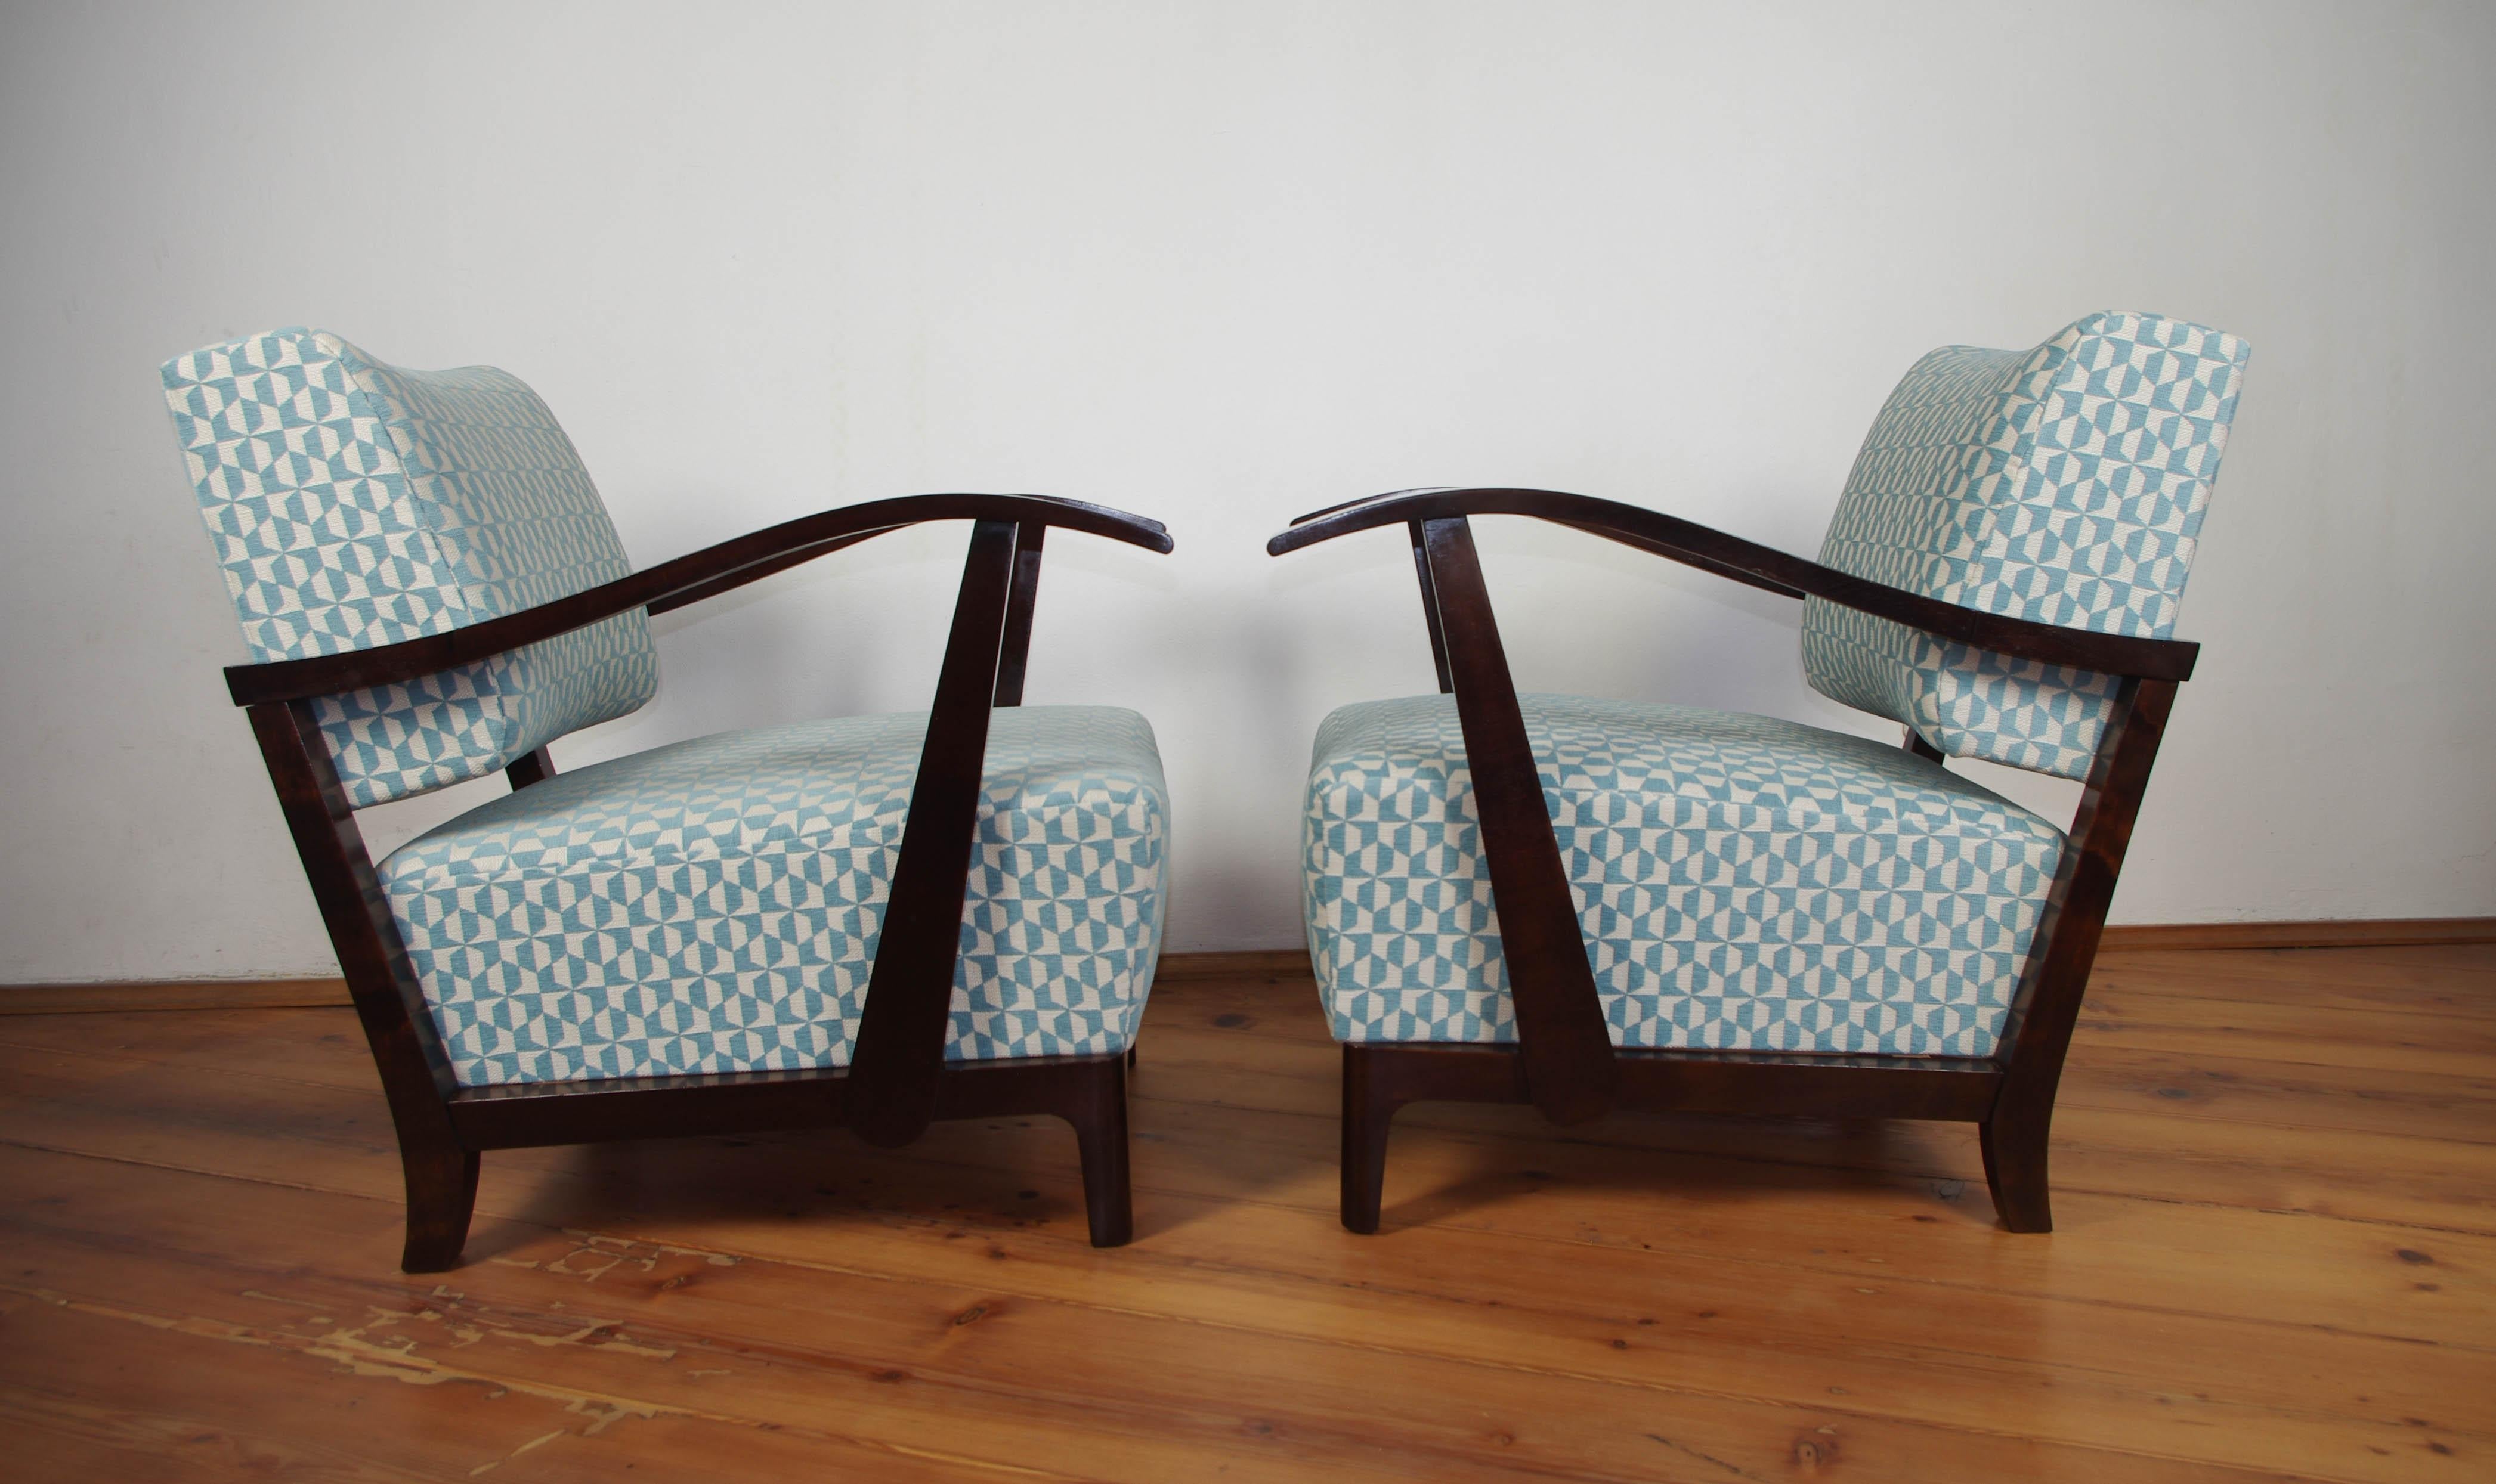 Beautifully restored set of two Art Deco armchairs. New upholstery from high quality fabric. Wooden veneered parts carefully restored and finished with new shellac. Very comfortable and eye-catching pieces.